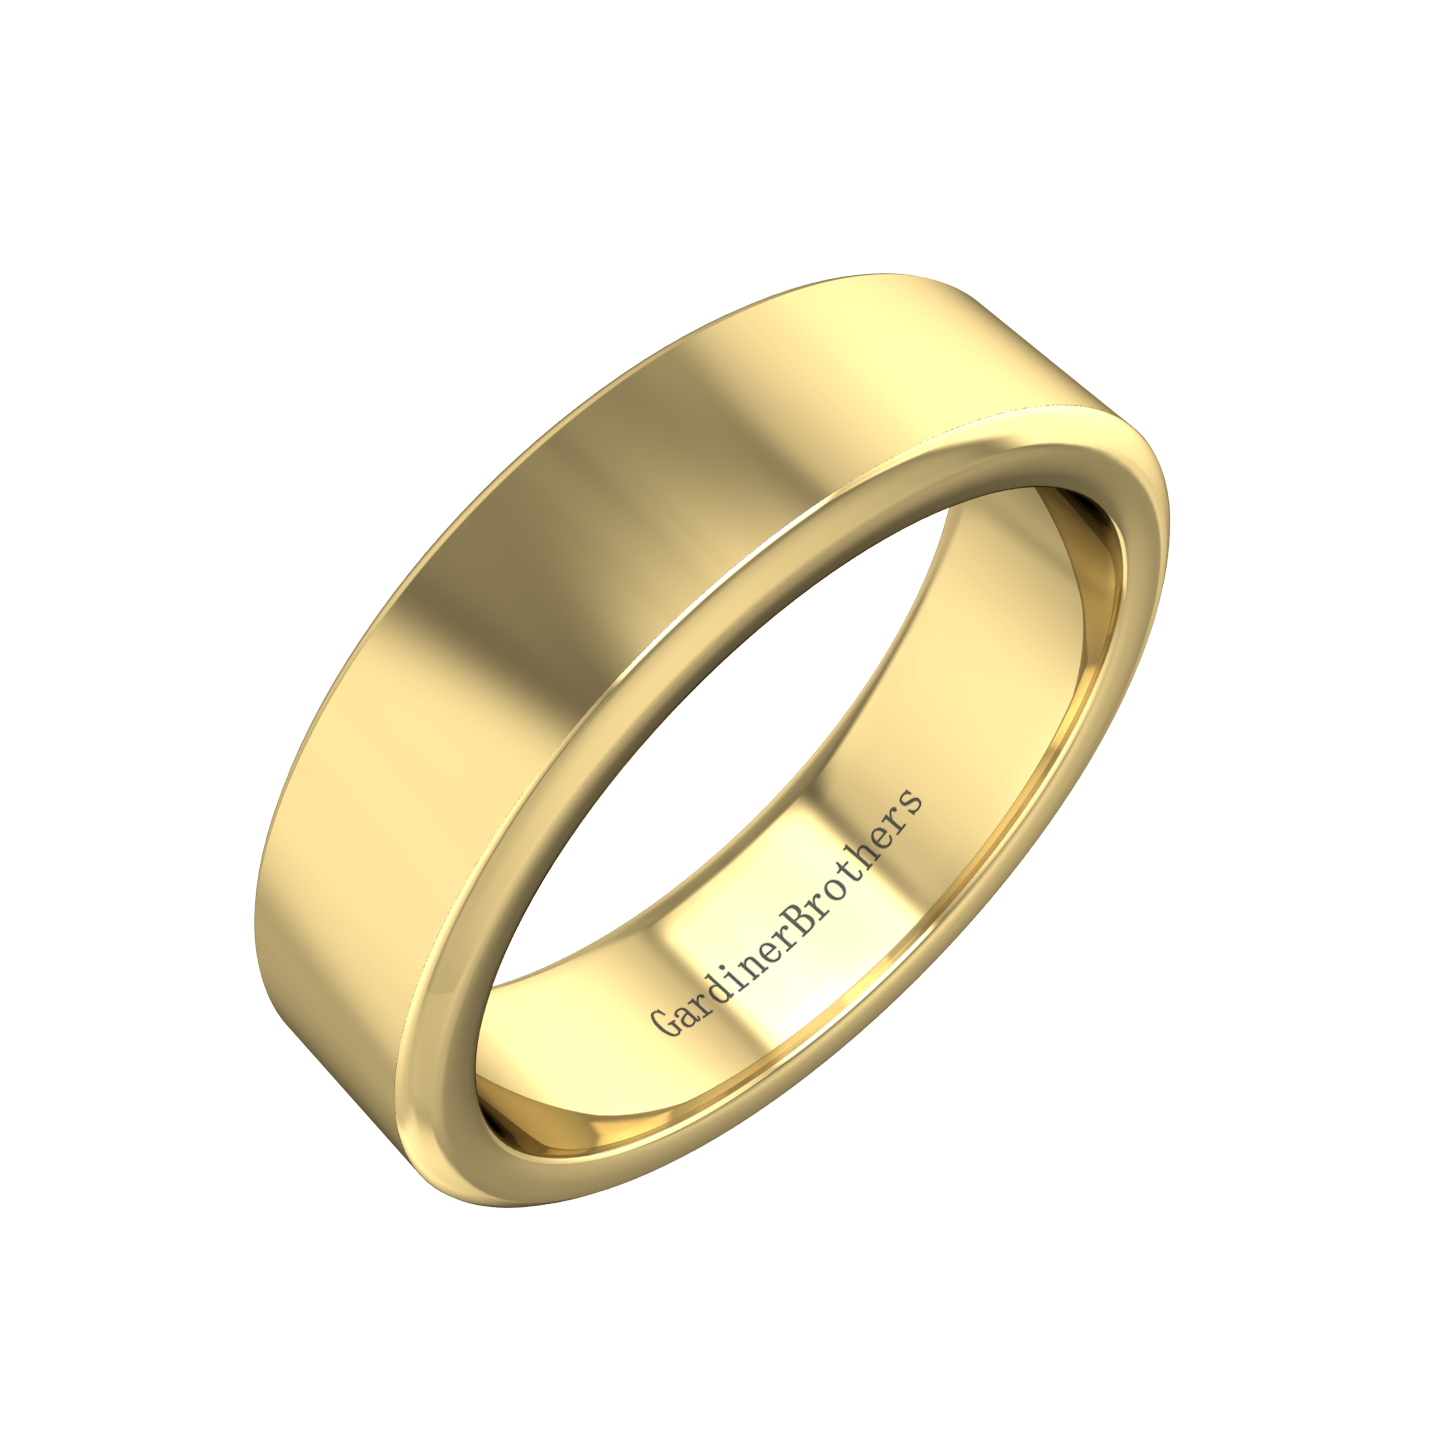 Plain Wedding Ring With A Flat Outside Profile and Bevelled Edge  Gardiner Brothers   